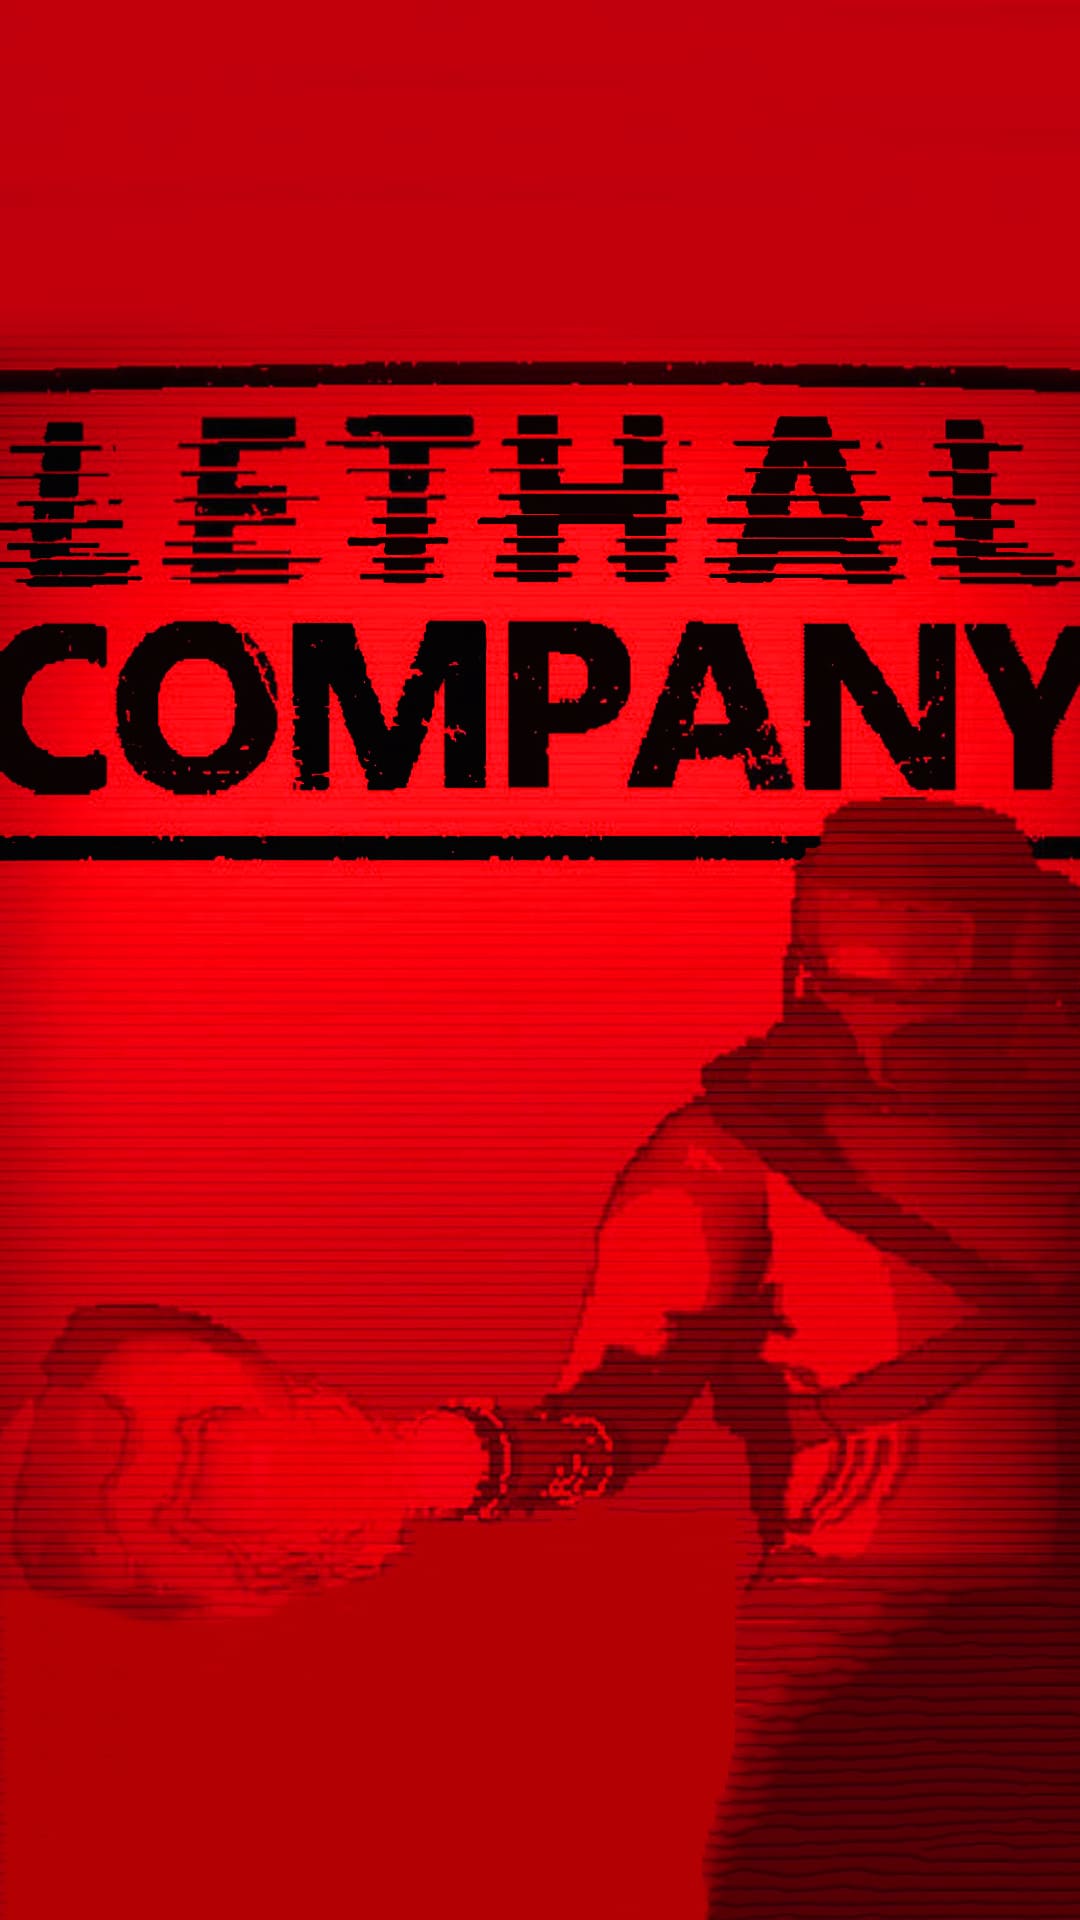 Lethal Company Wallpapers